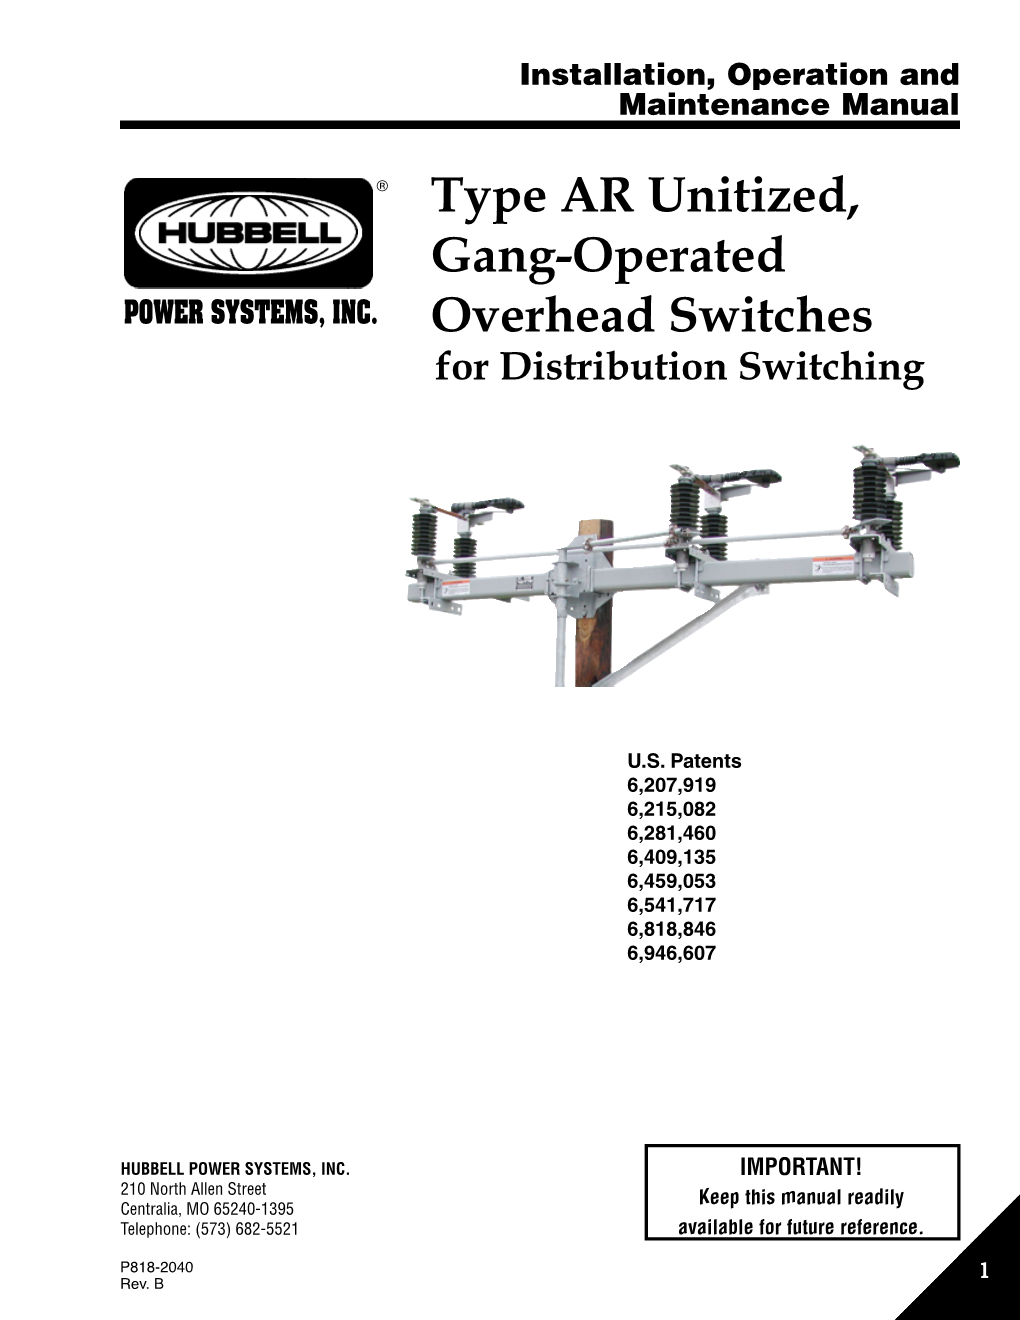 Type AR Unitized, Gang-Operated Overhead Switches